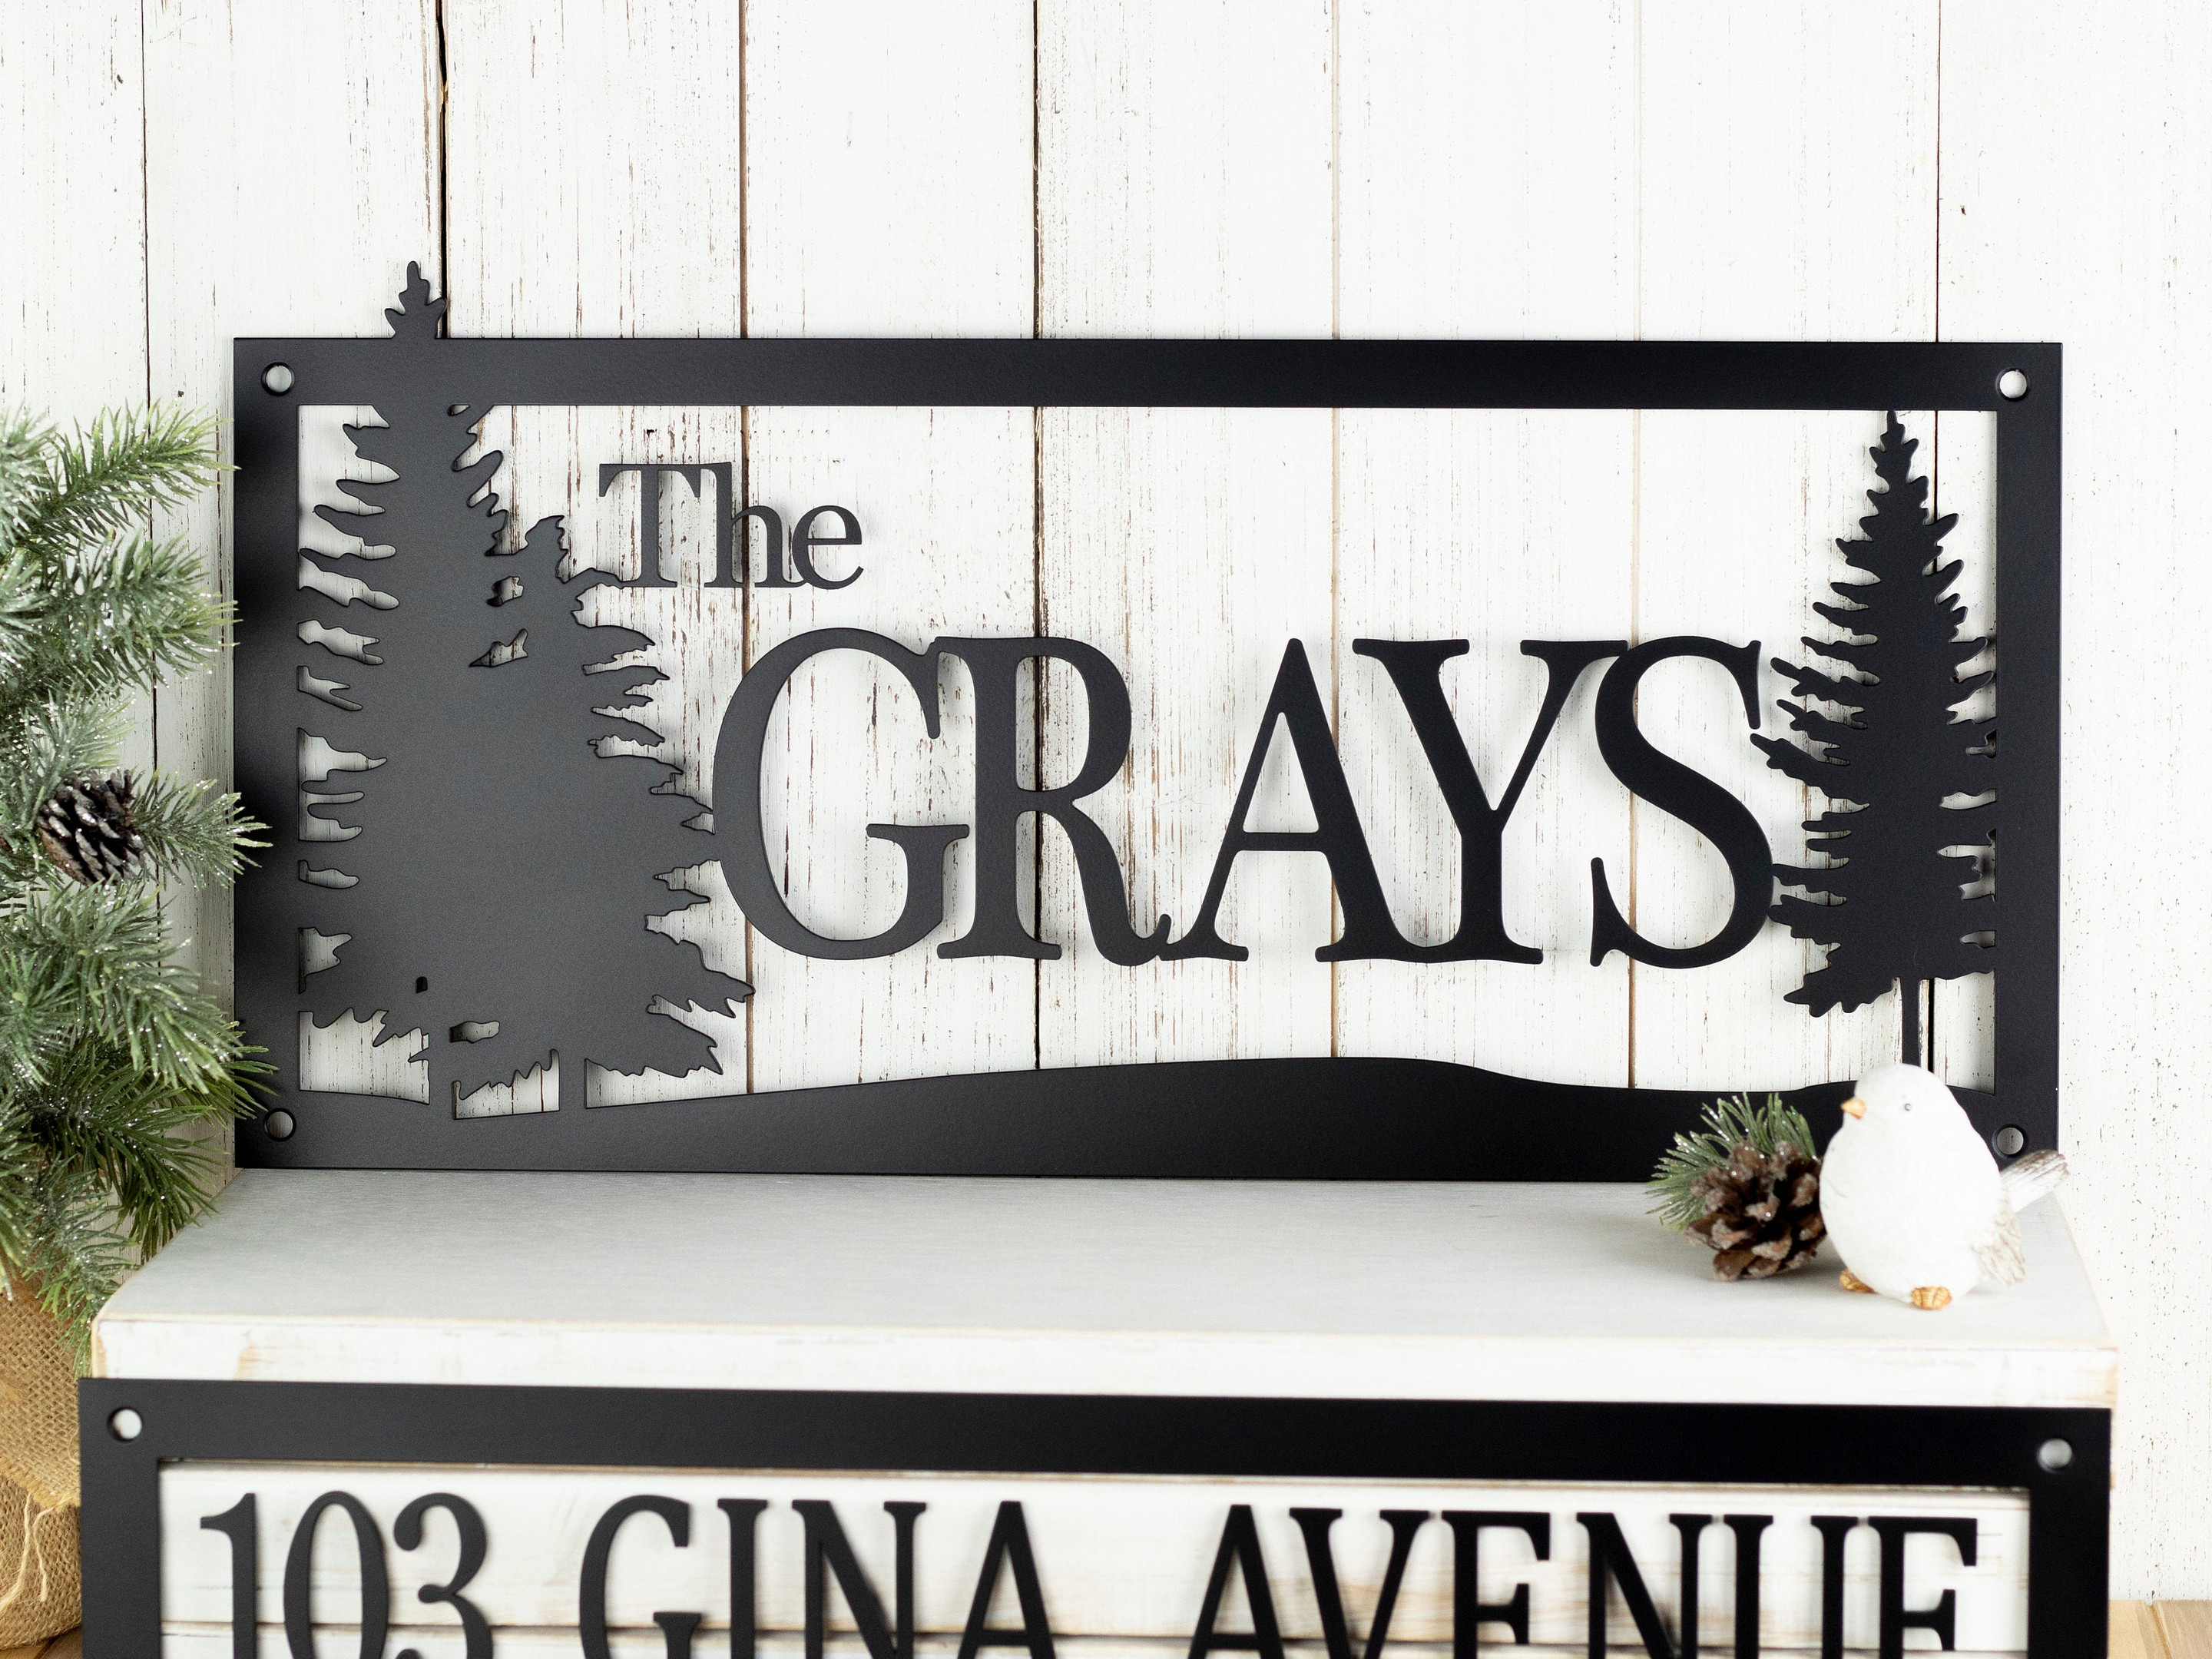 Custom Name And Address Metal Sign, Pine Trees, Outdoor Sign, Metal Wall Art, House Number, Address Plaque, Family Name, Laser Cut Metal Signs Custom Gift Ideas 14x14IN